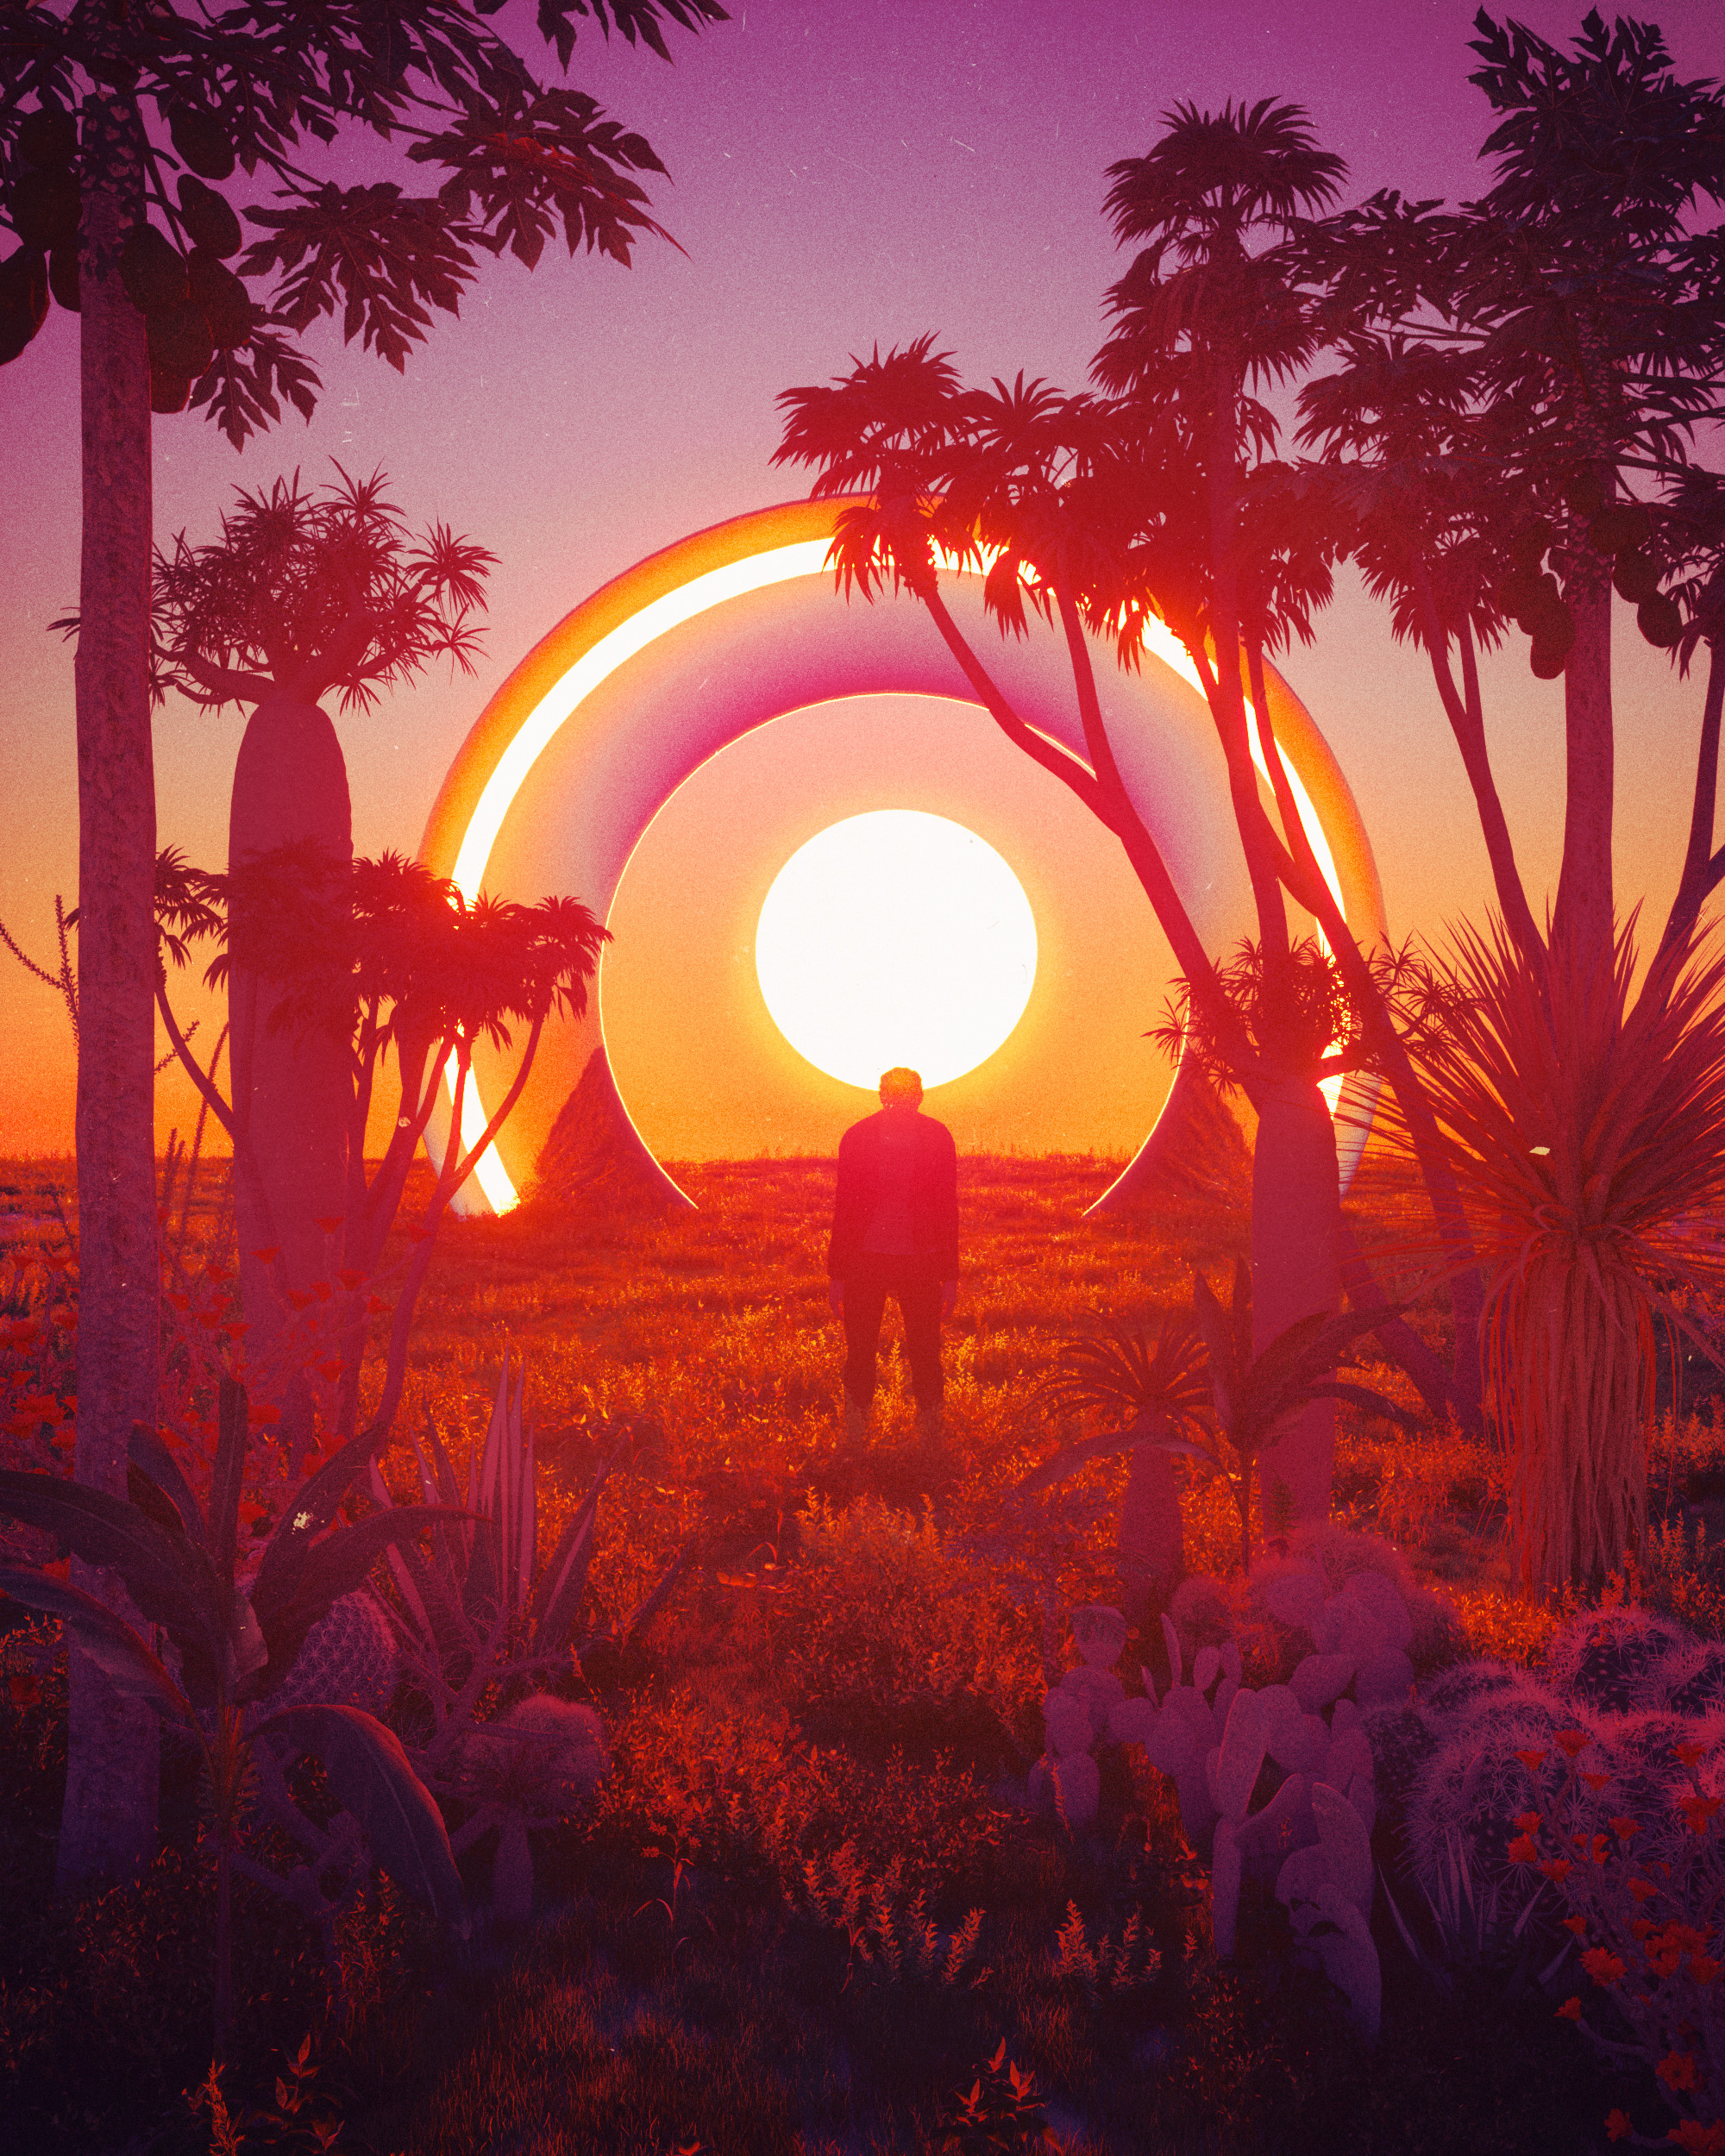 FLAT EARTH SUNSET by beeple